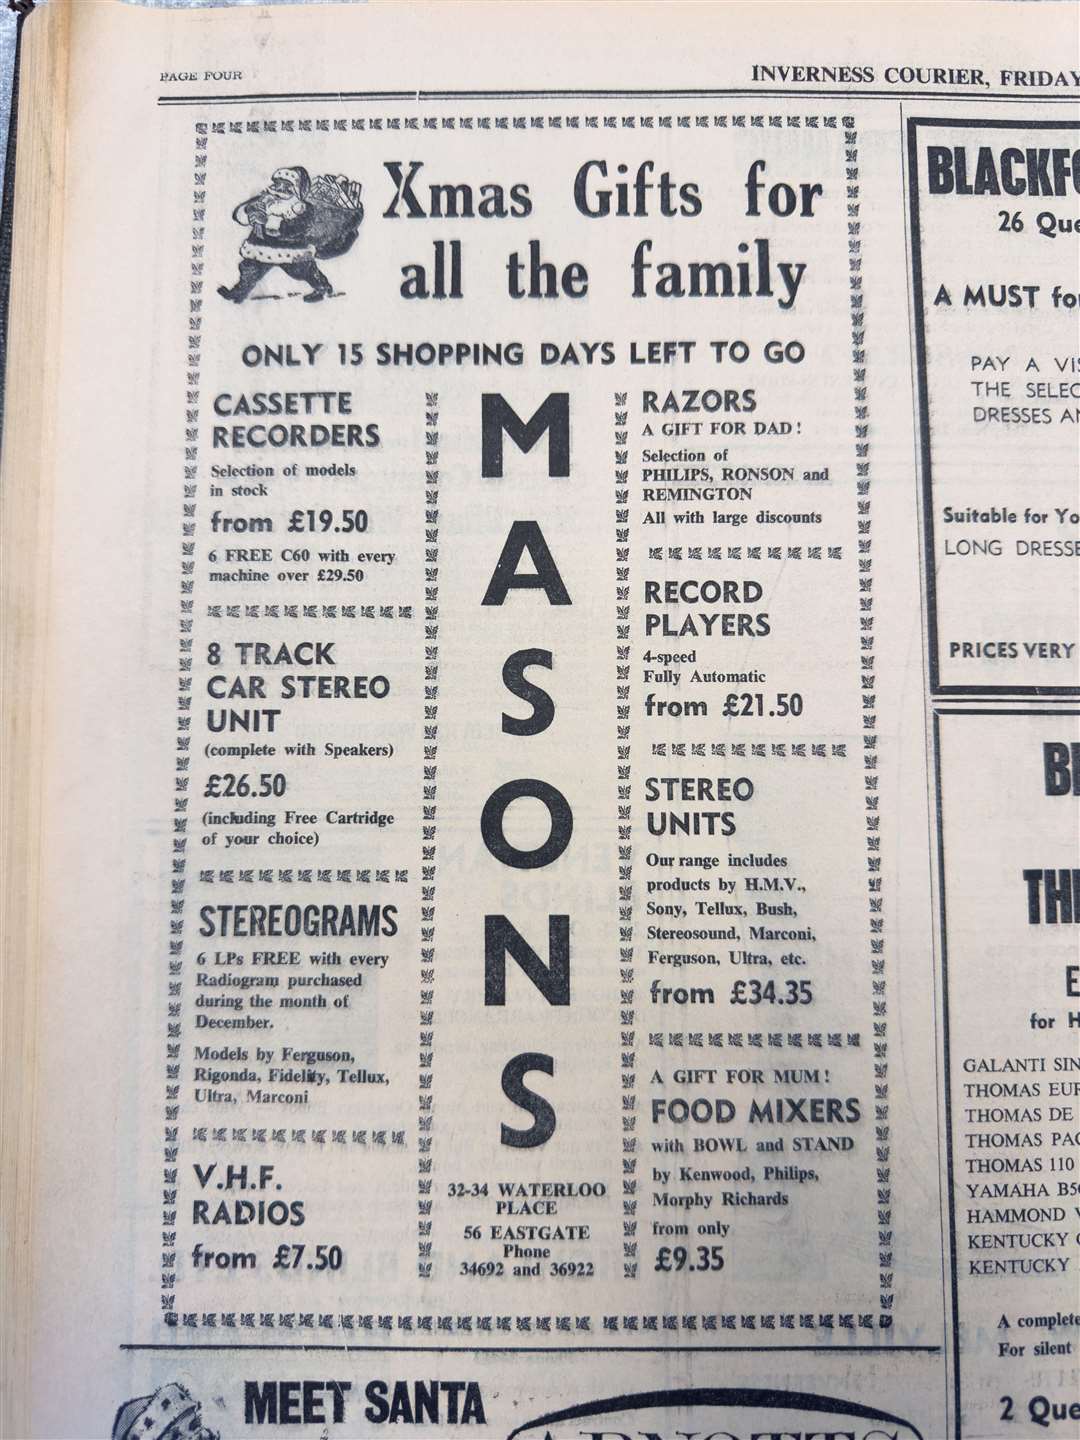 Christmas gifts for all the family were available at Masons in Eastgate and Waterloo Place.